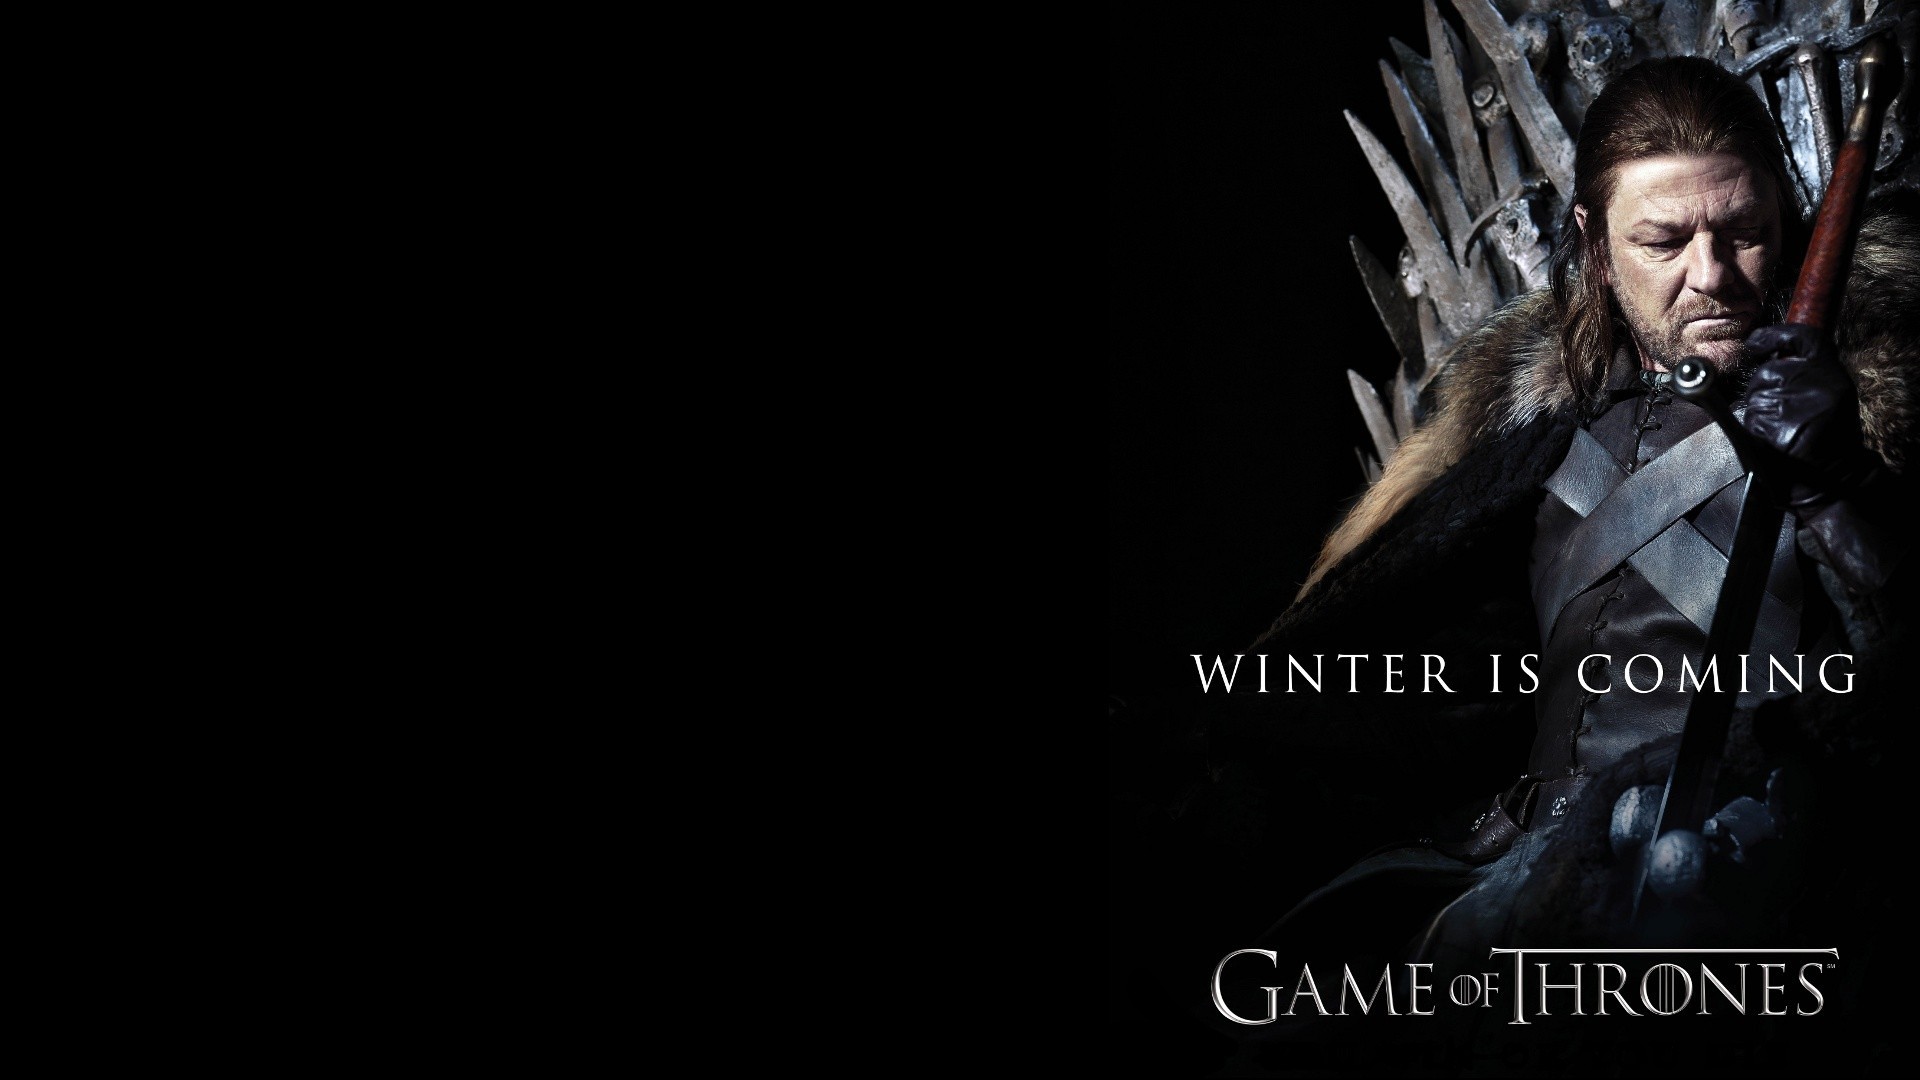 Game Of Thrones, Ned Stark, Winter Is Coming, Sean Bean Wallpaper